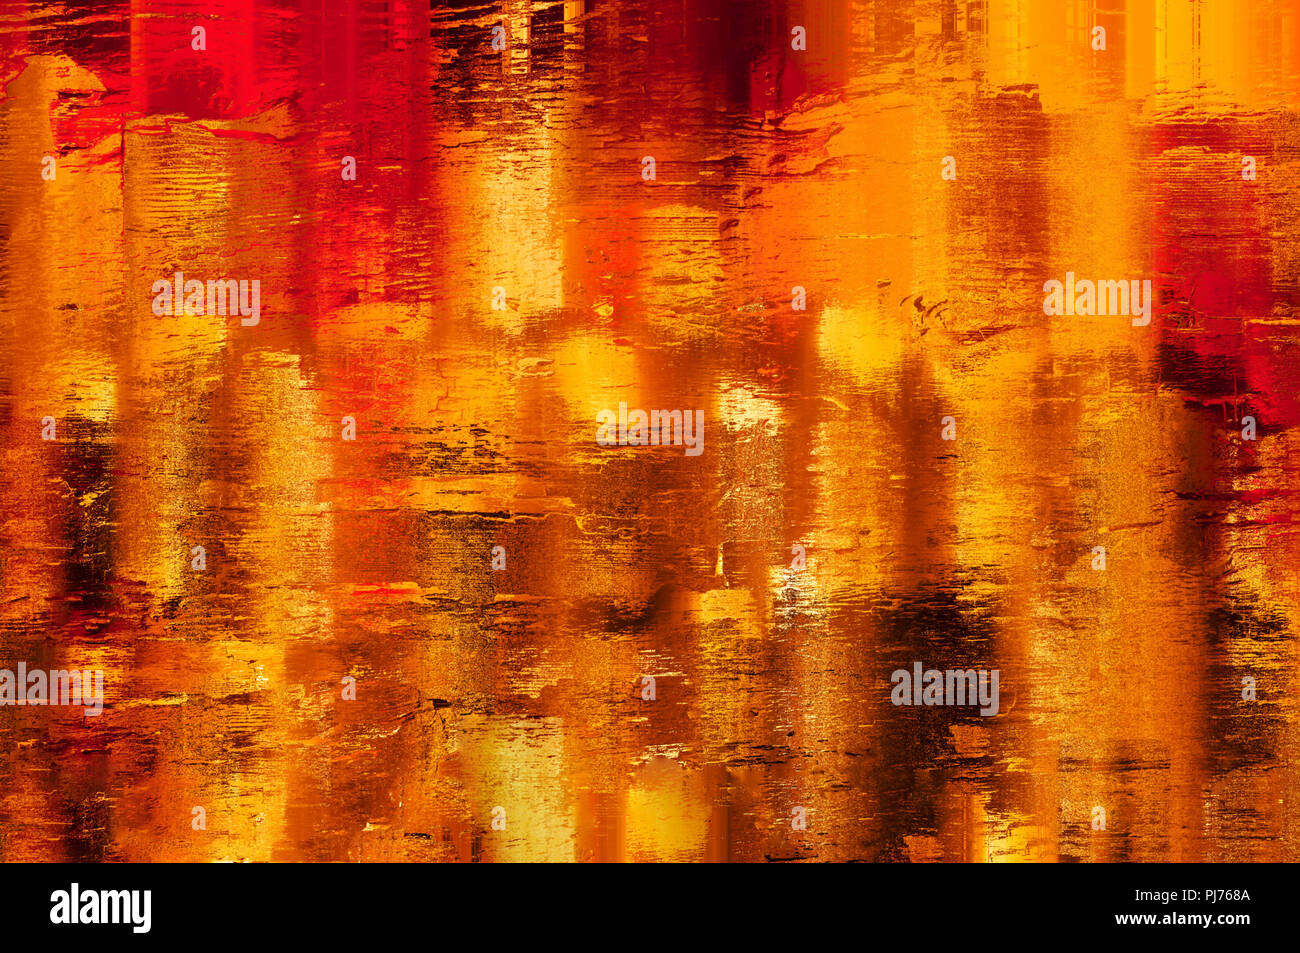 Shining, warm, yellow, amber, gold and orange abstract background texture. Appearance of lights reflected in wet surface. Painterly effect. Stock Photo